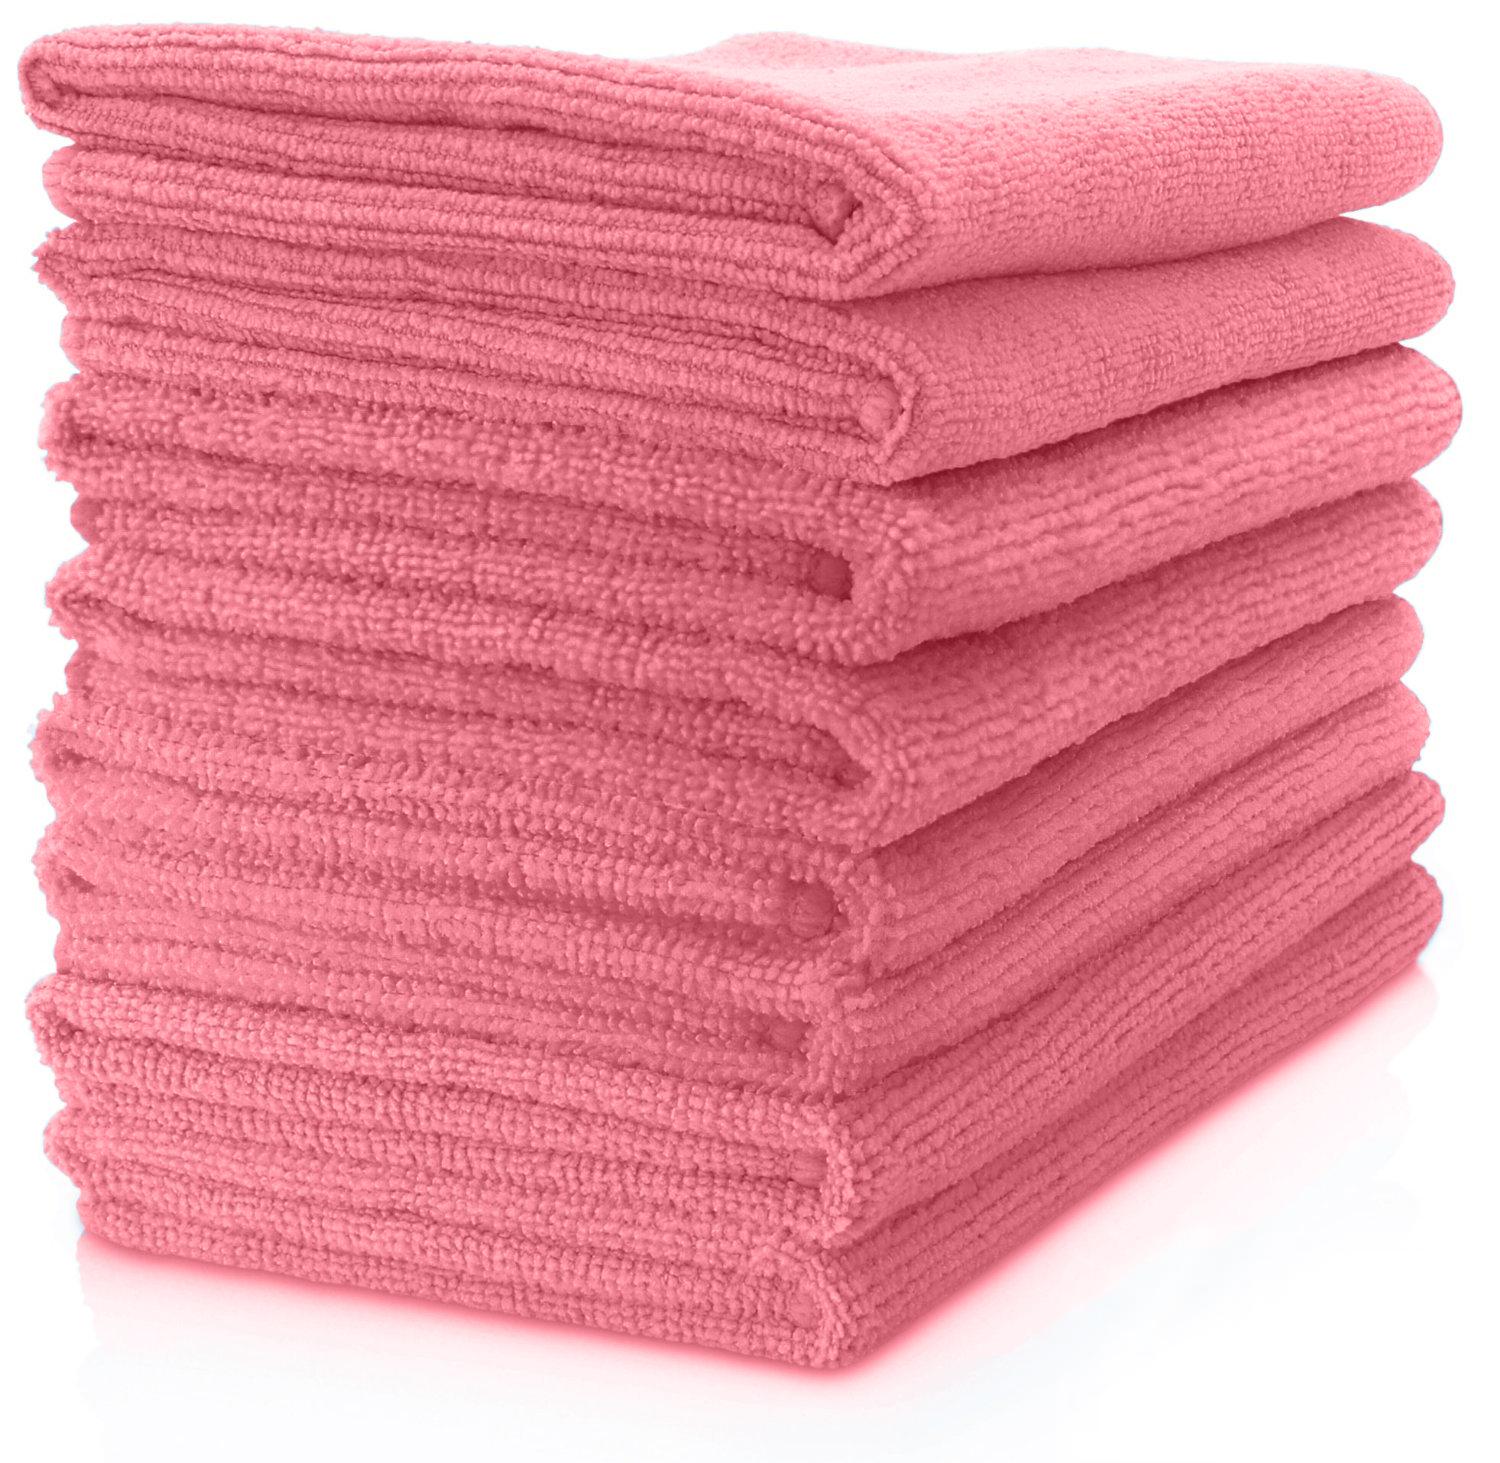 MAXIGLEAM Red/Pink Microfibre Cloths Pack of 50 Cloths 40x40cms